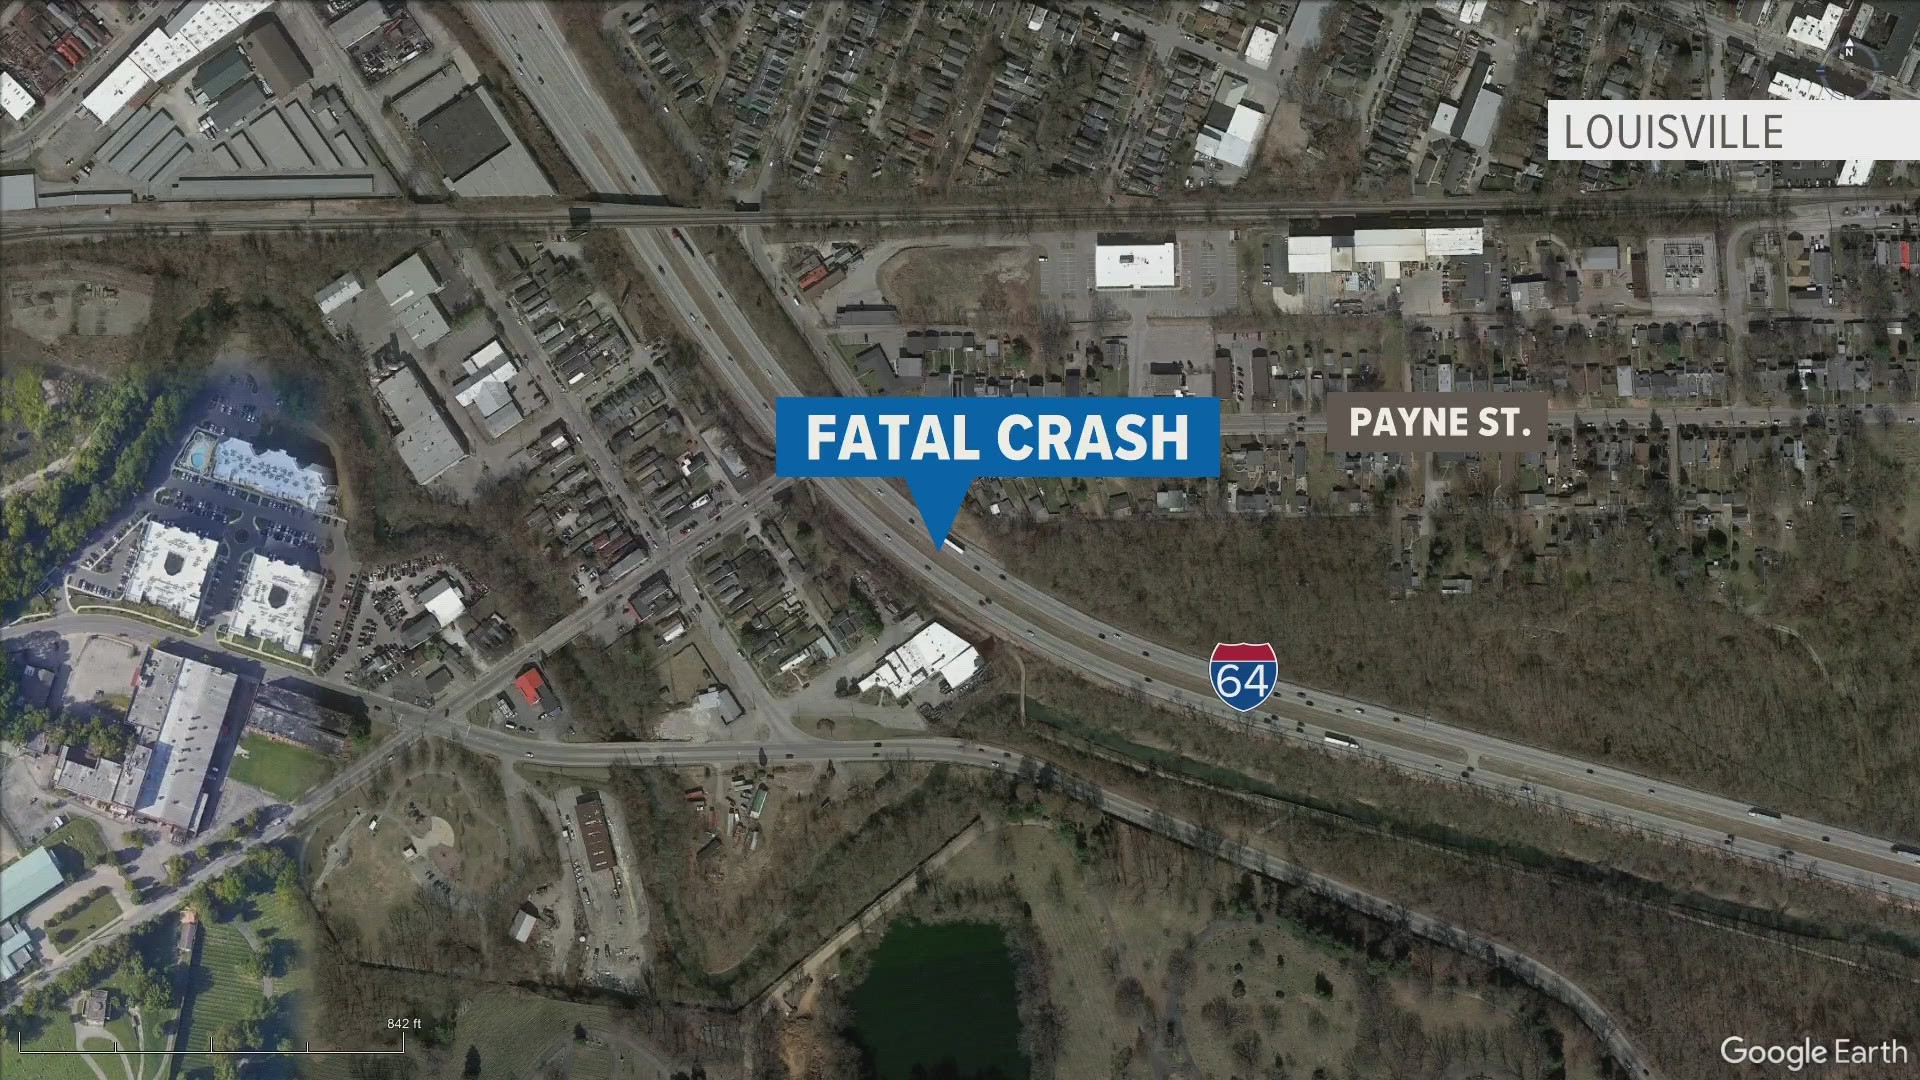 The coroner's office says Cordero Battles died after he lost control of his bike while going around a curve near Payne Street on Thursday.